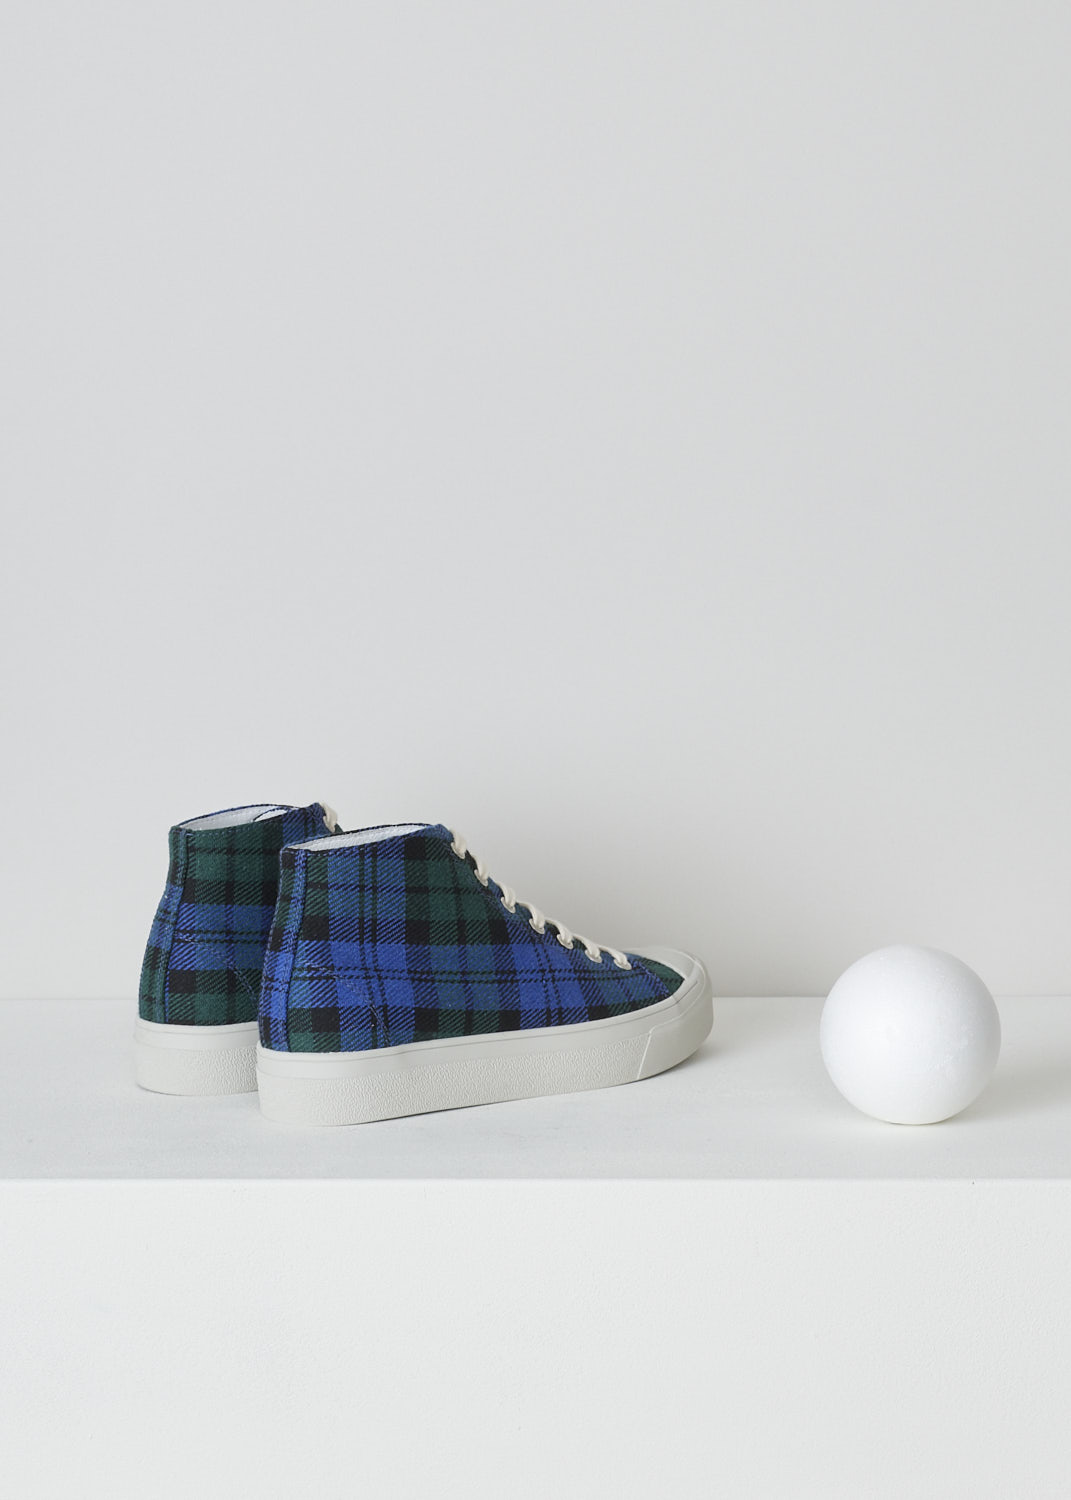 SOFIE Dâ€™HOORE, BLUE AND GREEN TARTAN SNEAKERS, FOSTER_WSCOT_TARTAN_5, Green, Blue, Print, Back, These high top sneakers with blue and green tartan print feature front lace-up fastening with white laces. These sneakers have a round toe with a white rubber toe cap. These shoes have white rubber soles.
  
